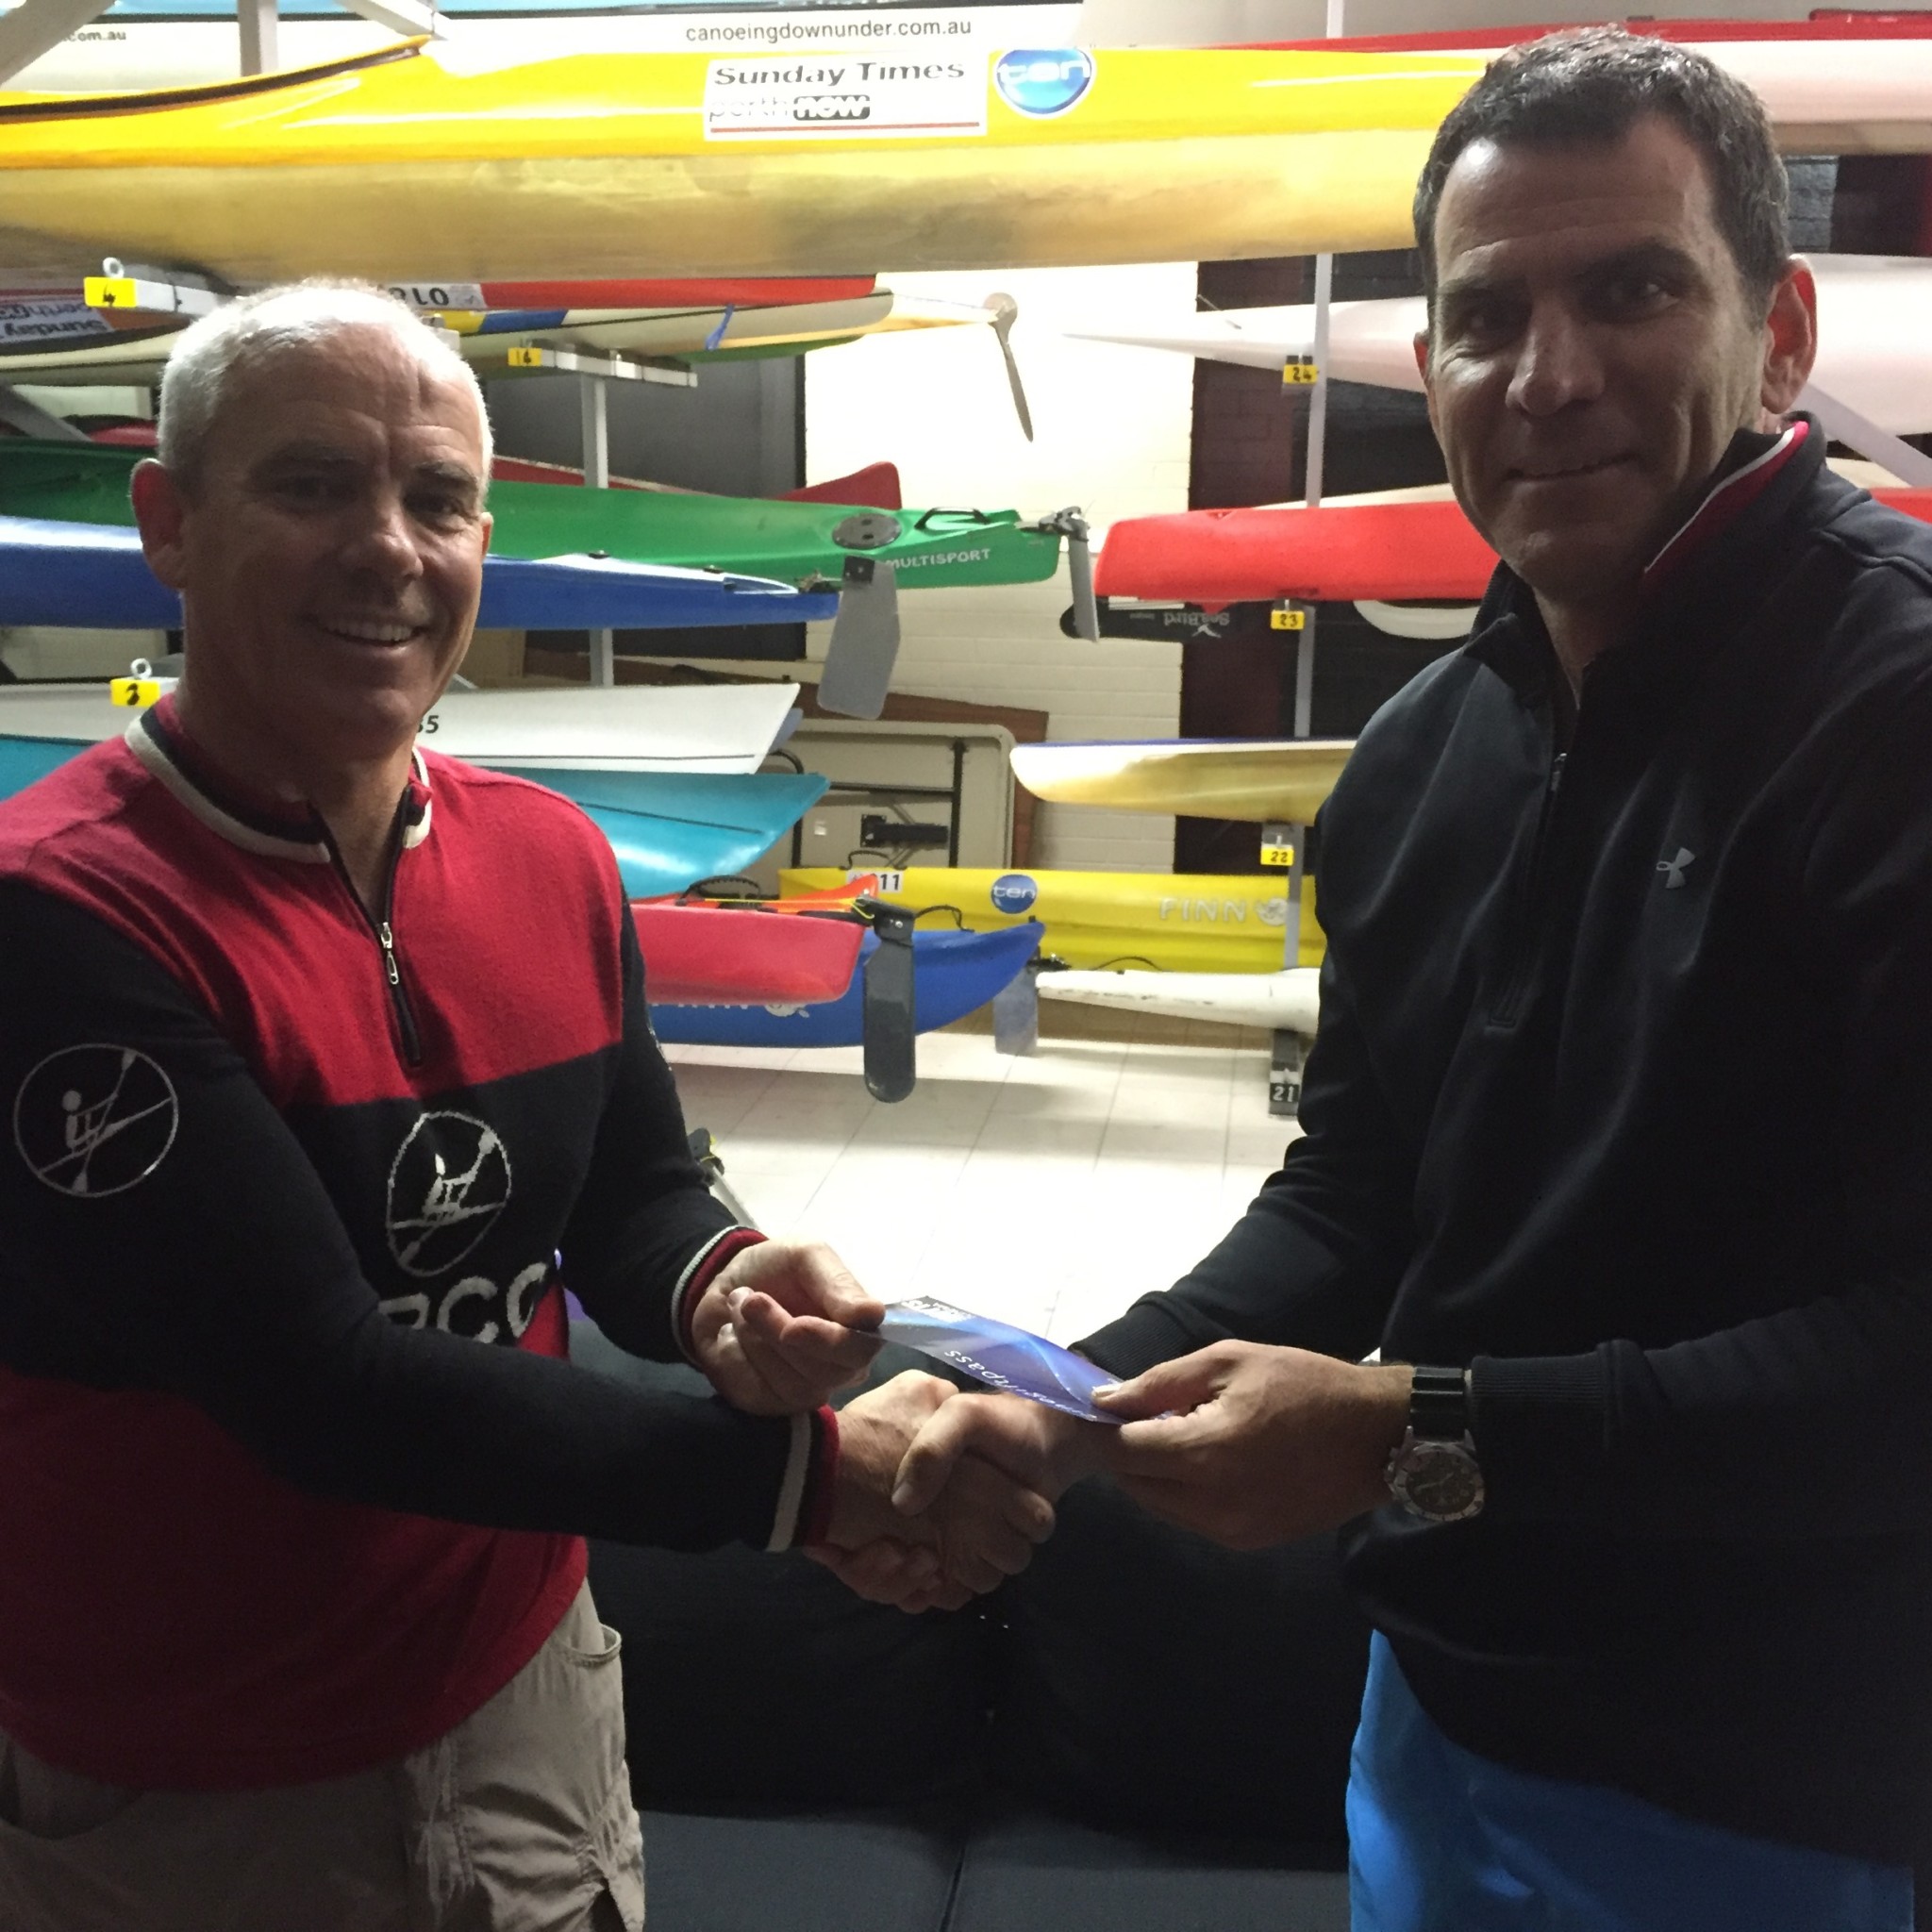 Tuesday 8th November 2016 : Tonight's photo shows club Committee member Stuart Hyde presenting Peter Fergusson with his movie voucher